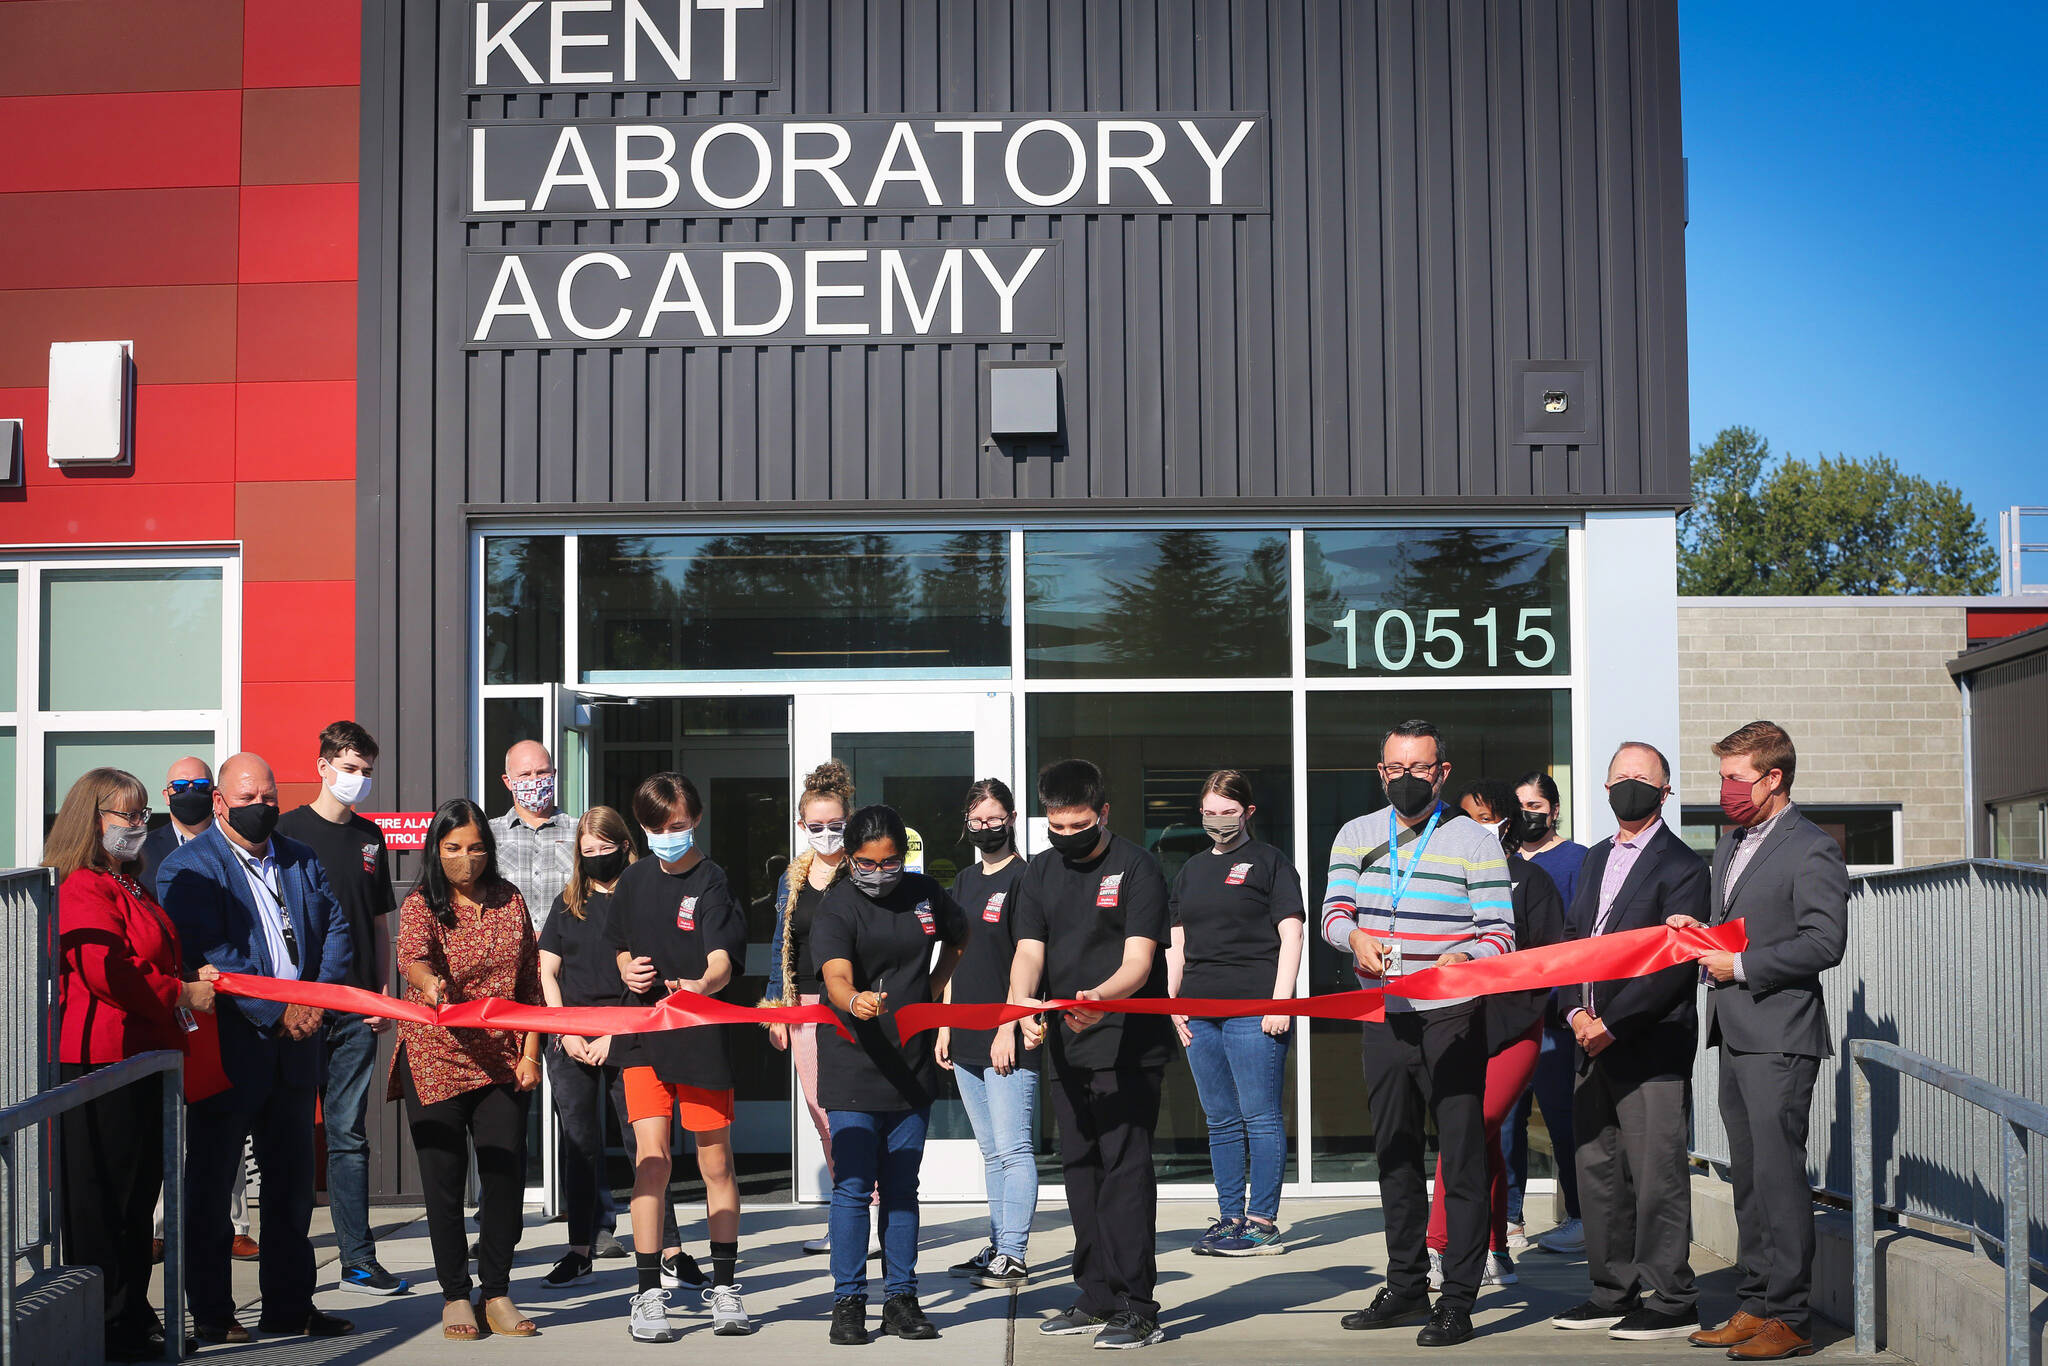 Kent School District leaders and others celebrate the opening of the Kent Laboratory Academy on Aug. 28. COURTESY PHOTO, Kent School District